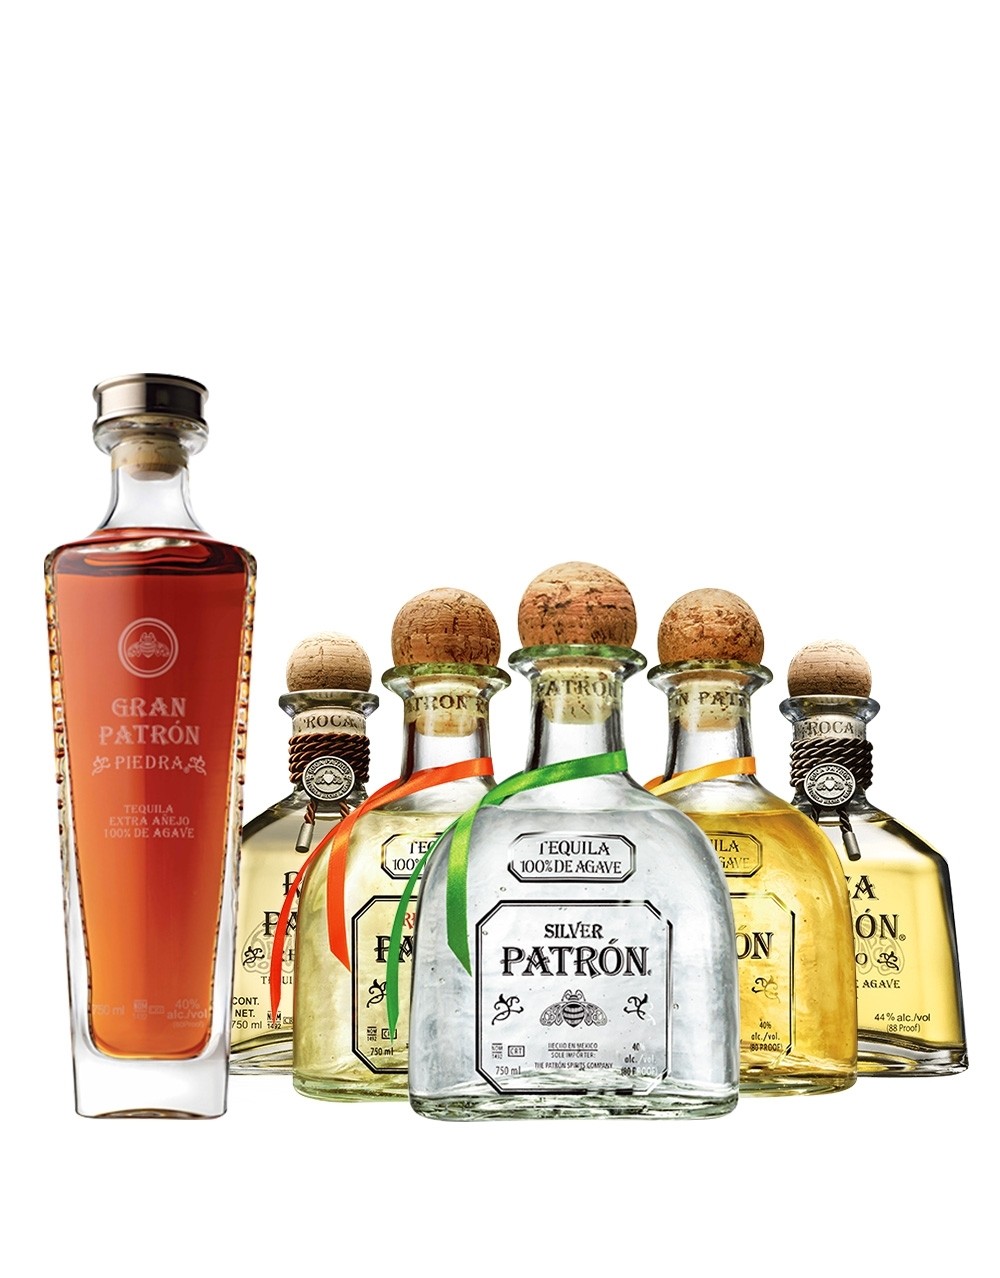 Patrón Heritage Club (6 Bottle Subscription) | Buy Online or Send as a ...